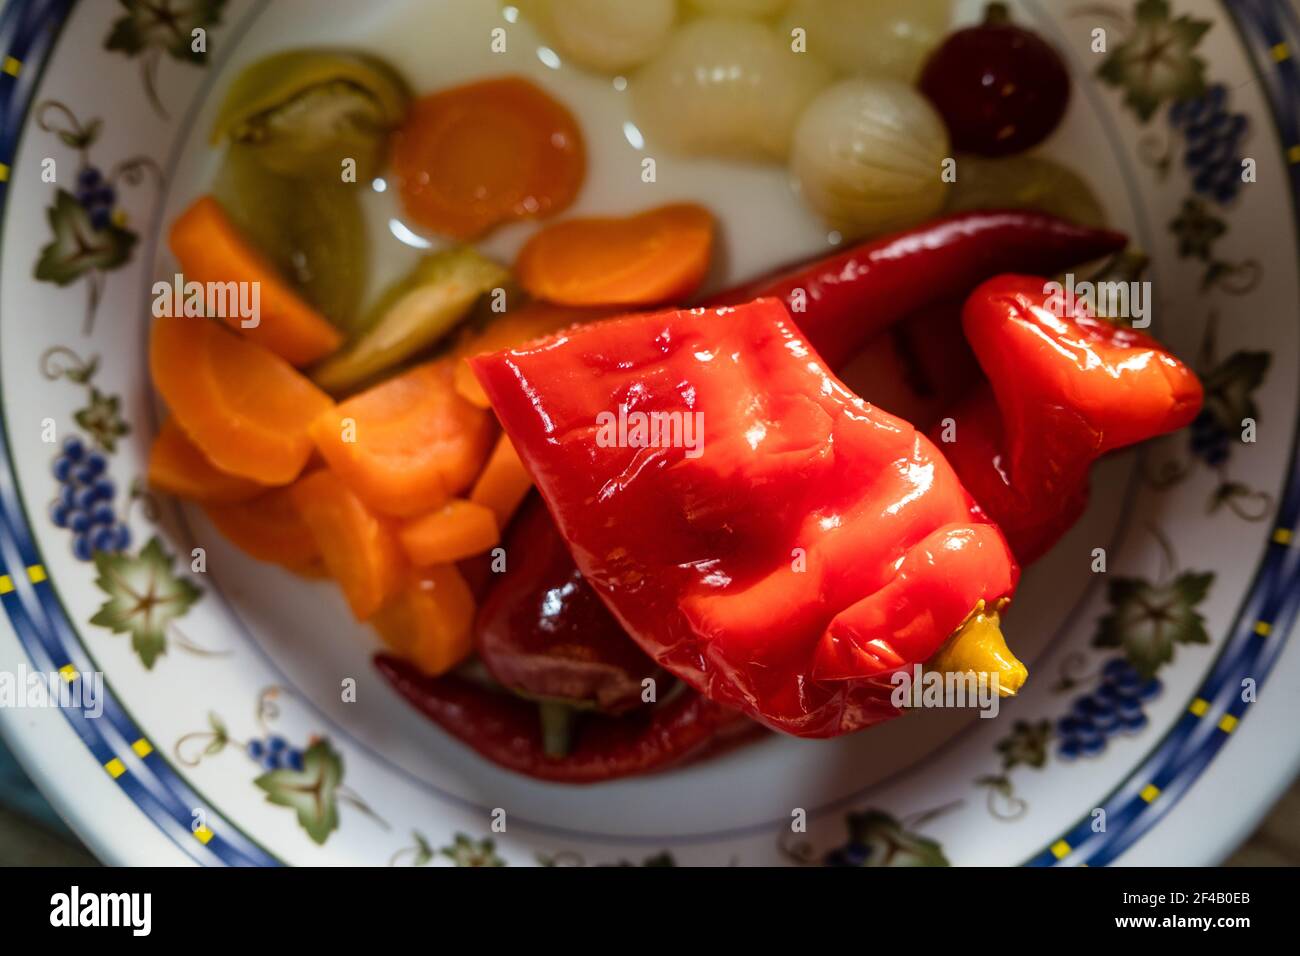 Top view on traditional serbian winter stores pickled vegetables in plate Stock Photo